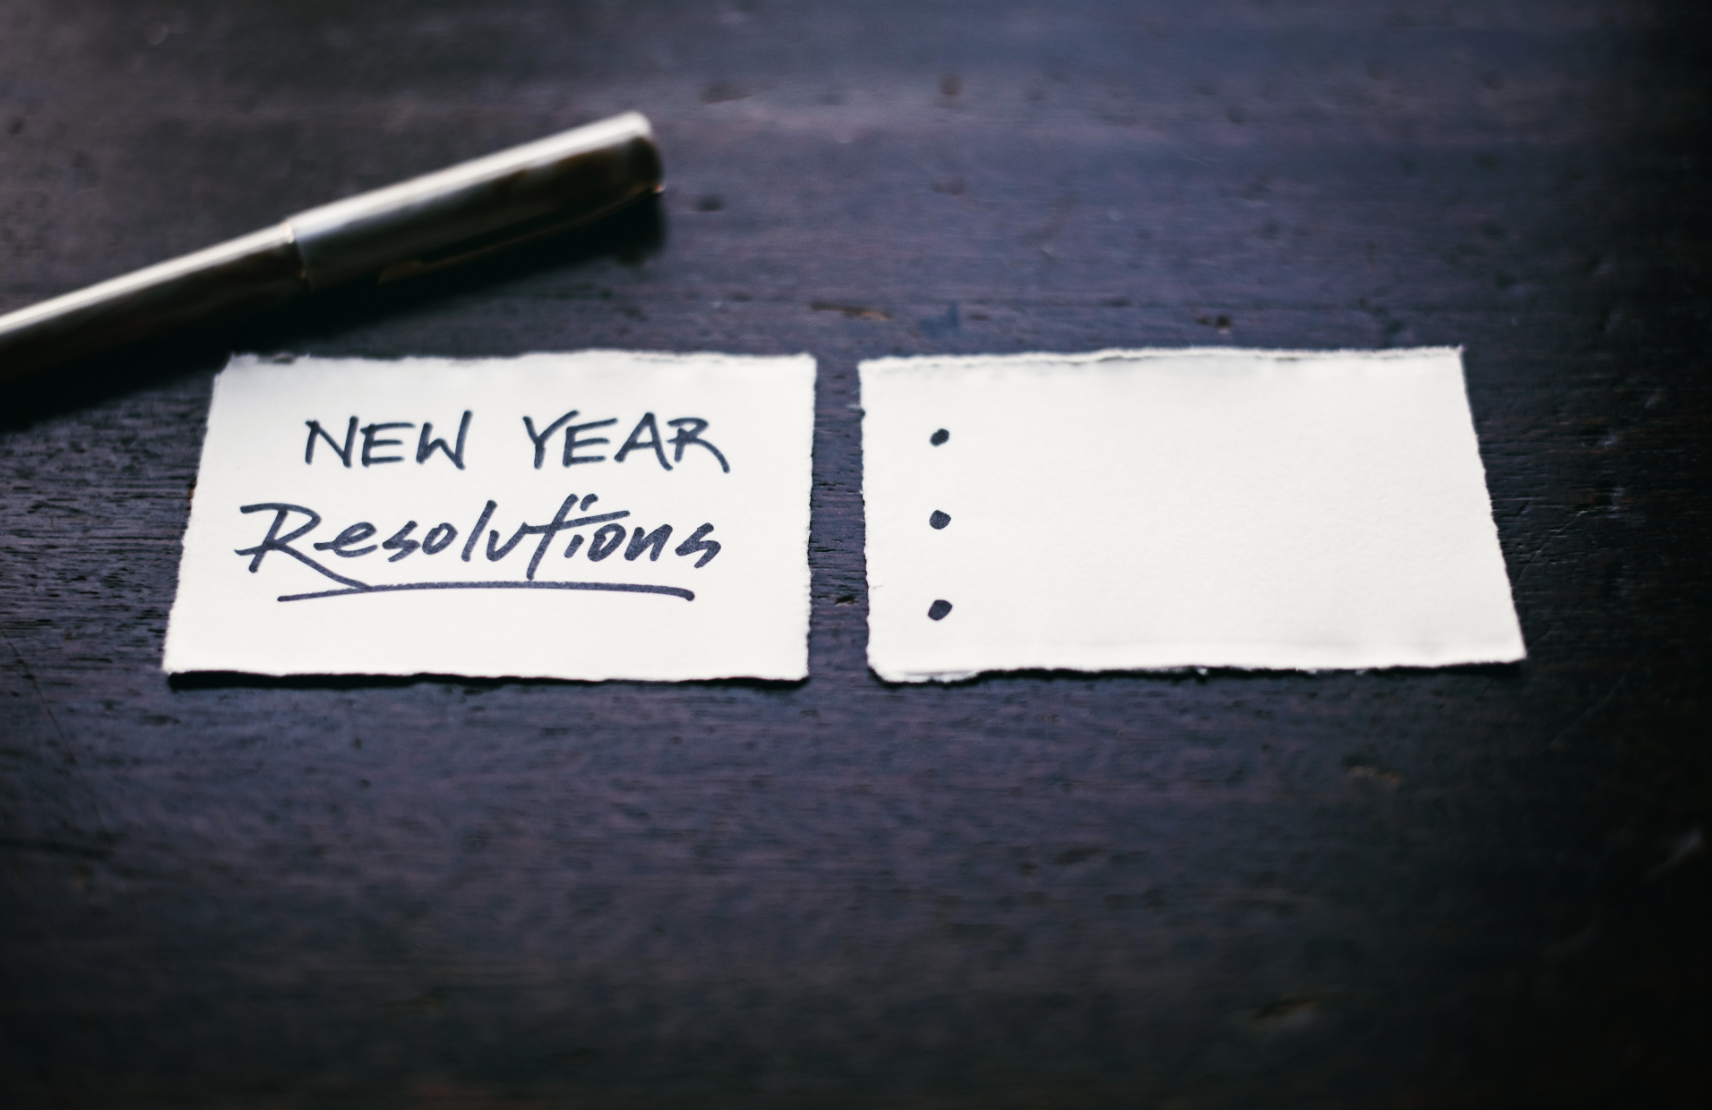 Blog about getting your home sold in 2023, this picture shows a list of New Years Resolutions